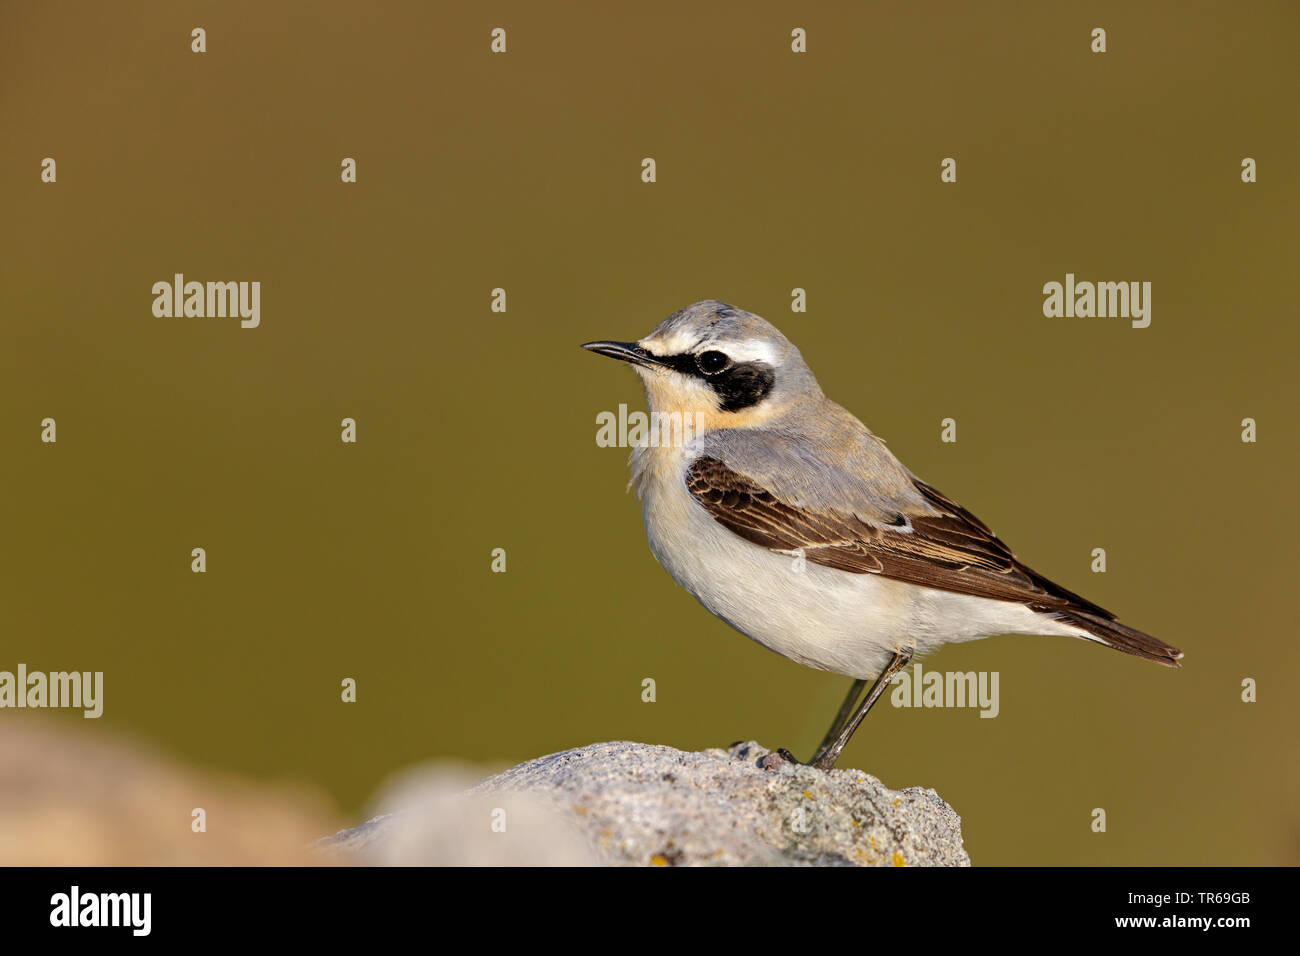 northern wheatear (Oenanthe oenanthe), male sitting on a stone, Greece, Lesbos Stock Photo